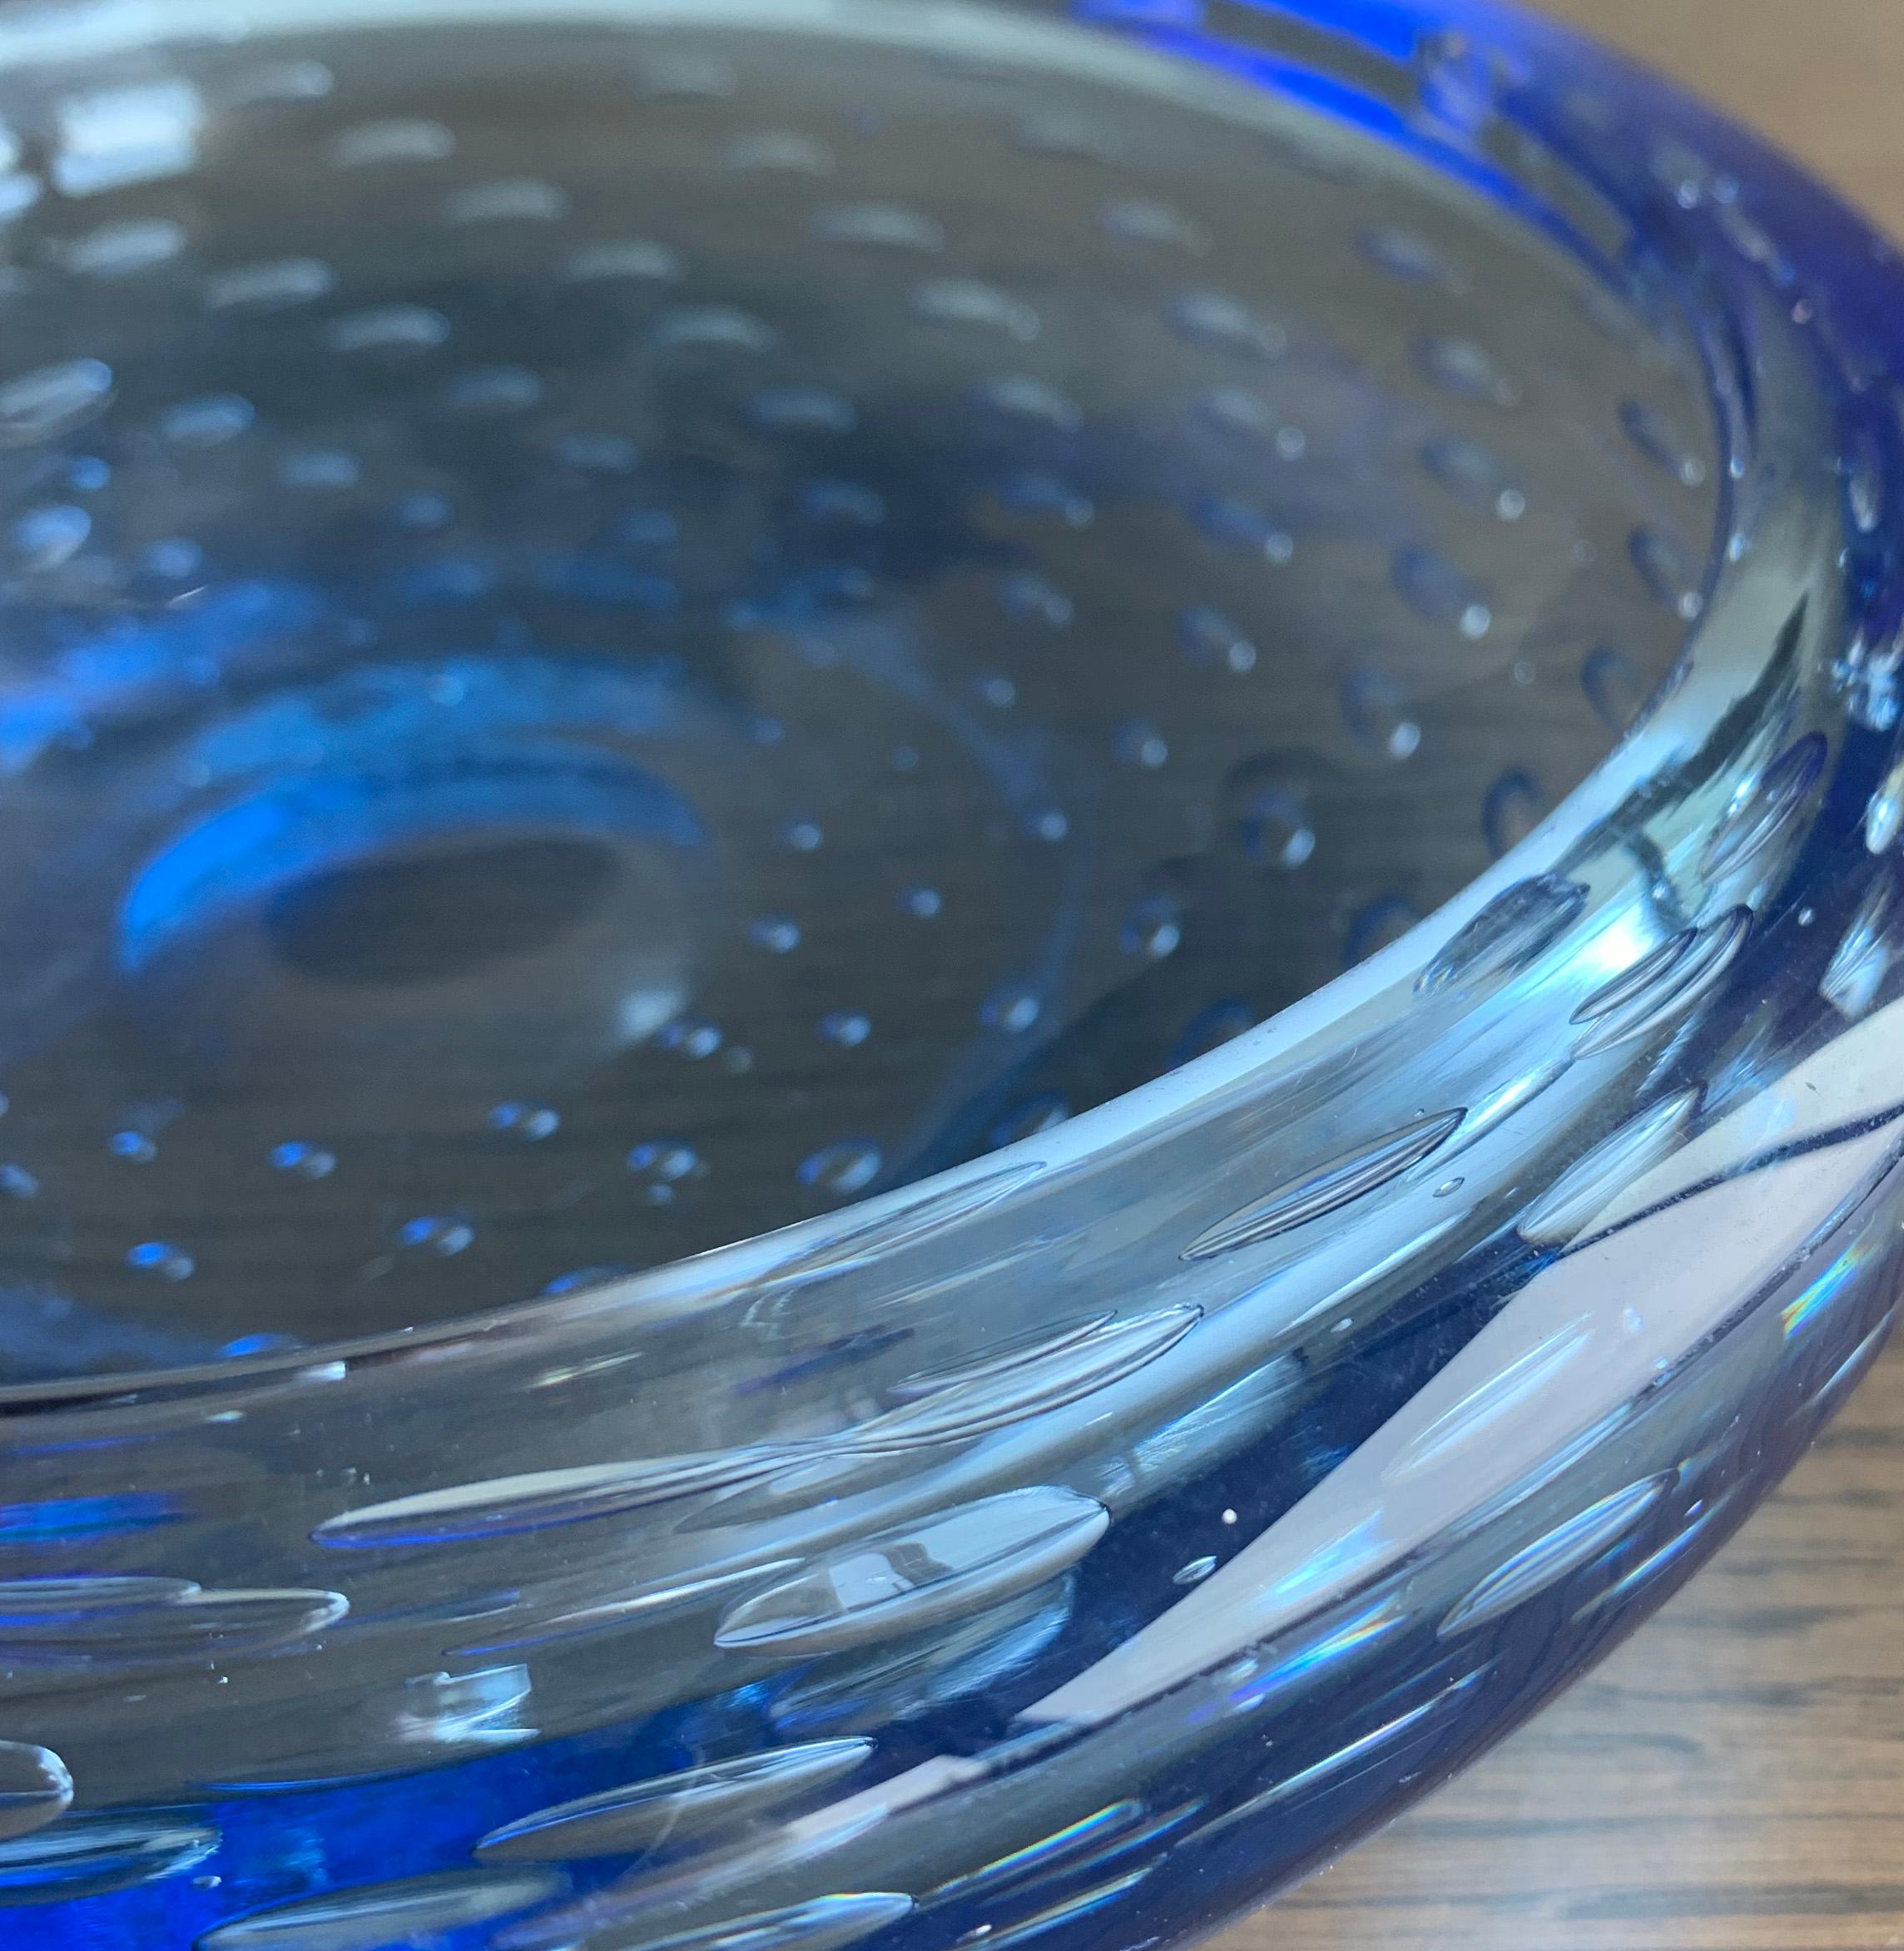 blue glass dishes